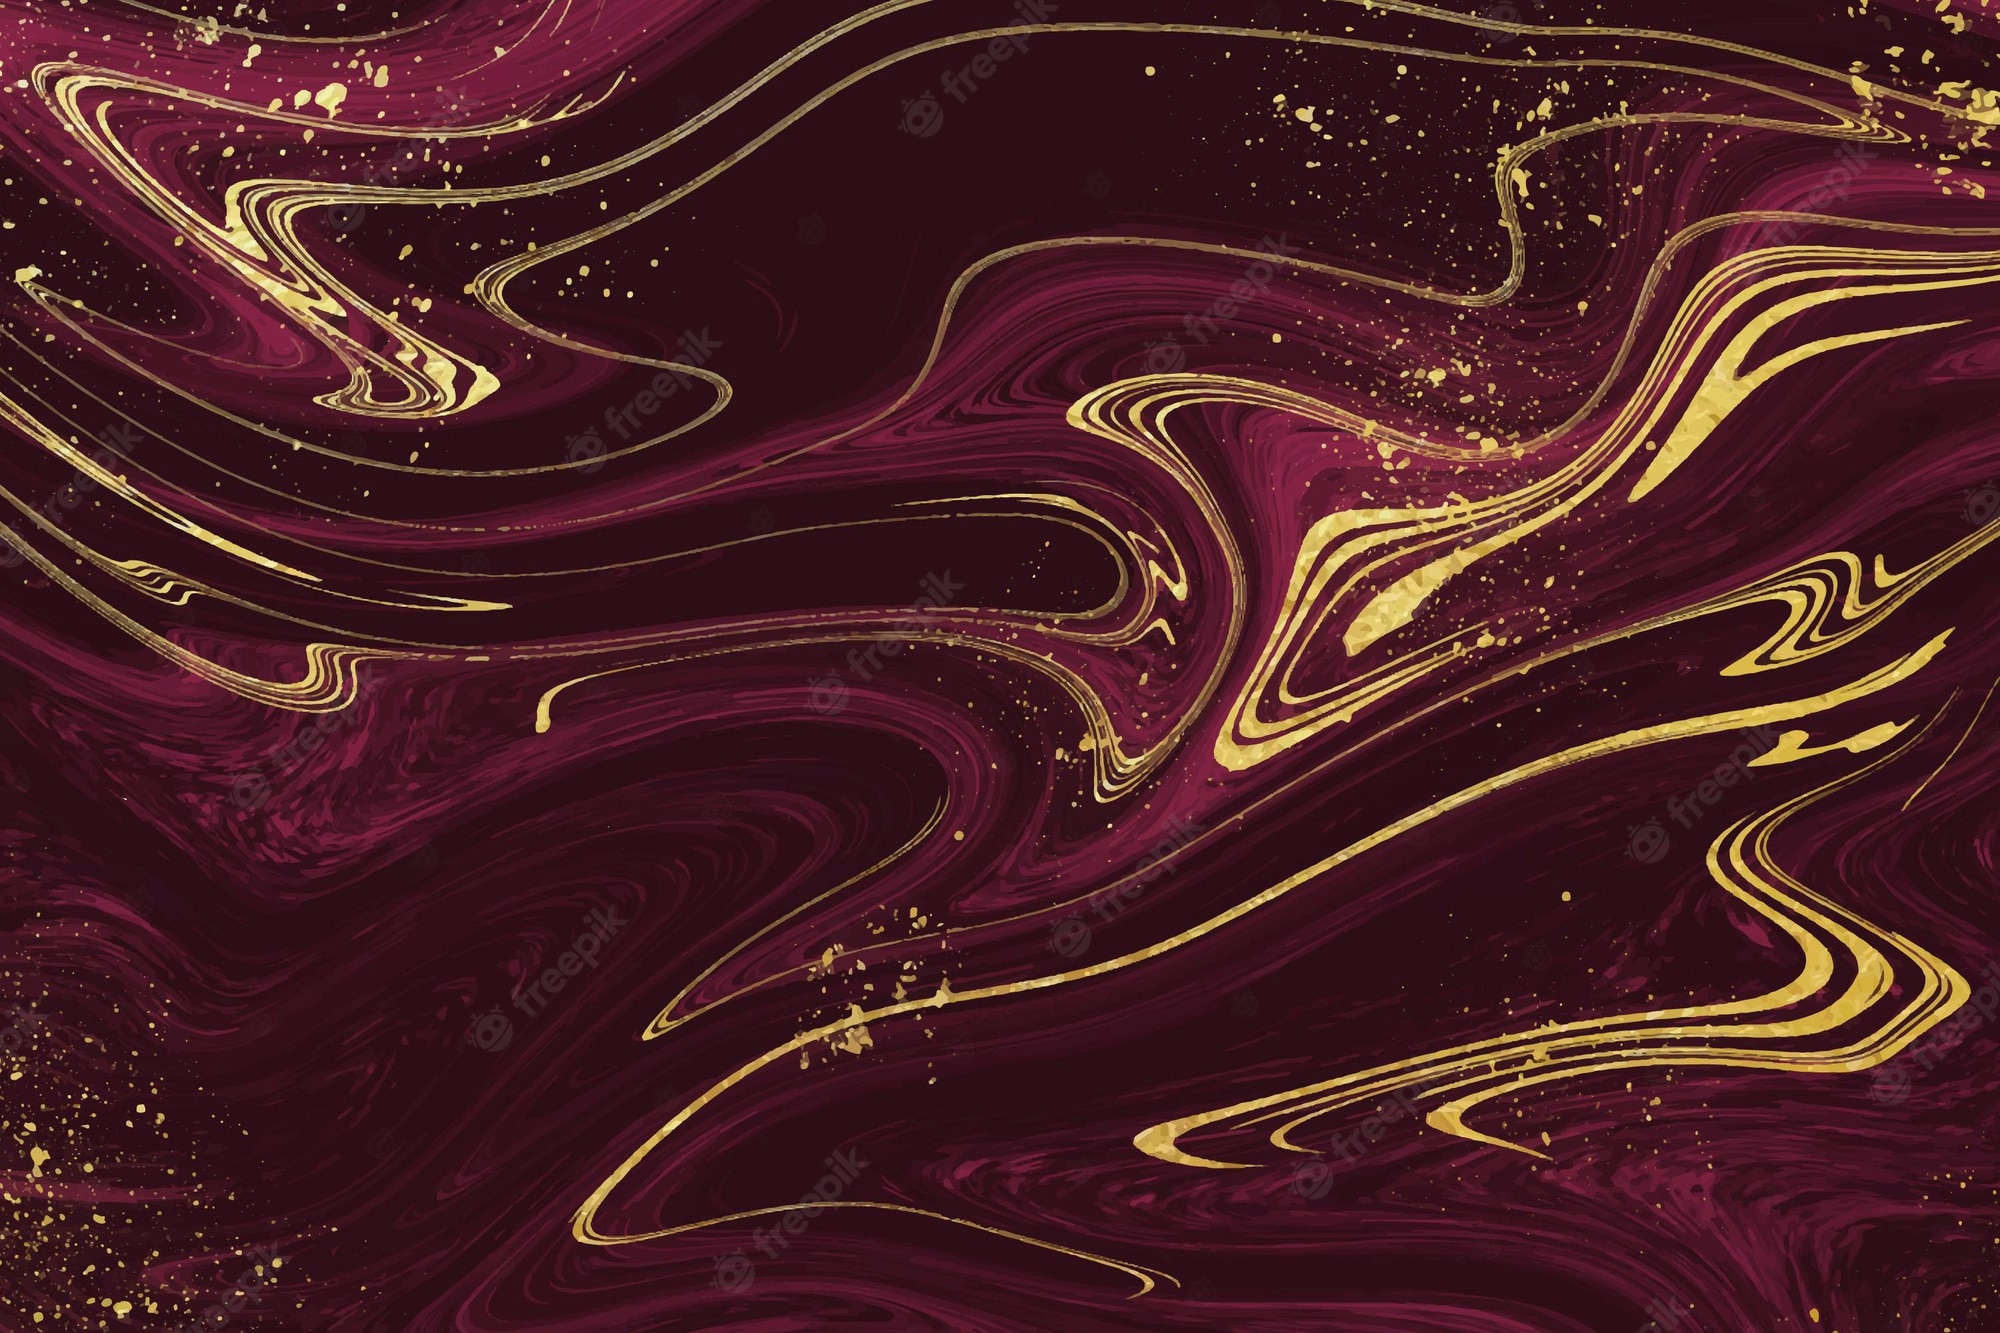 Black Gold Marble Image. Free Vectors, & PSD